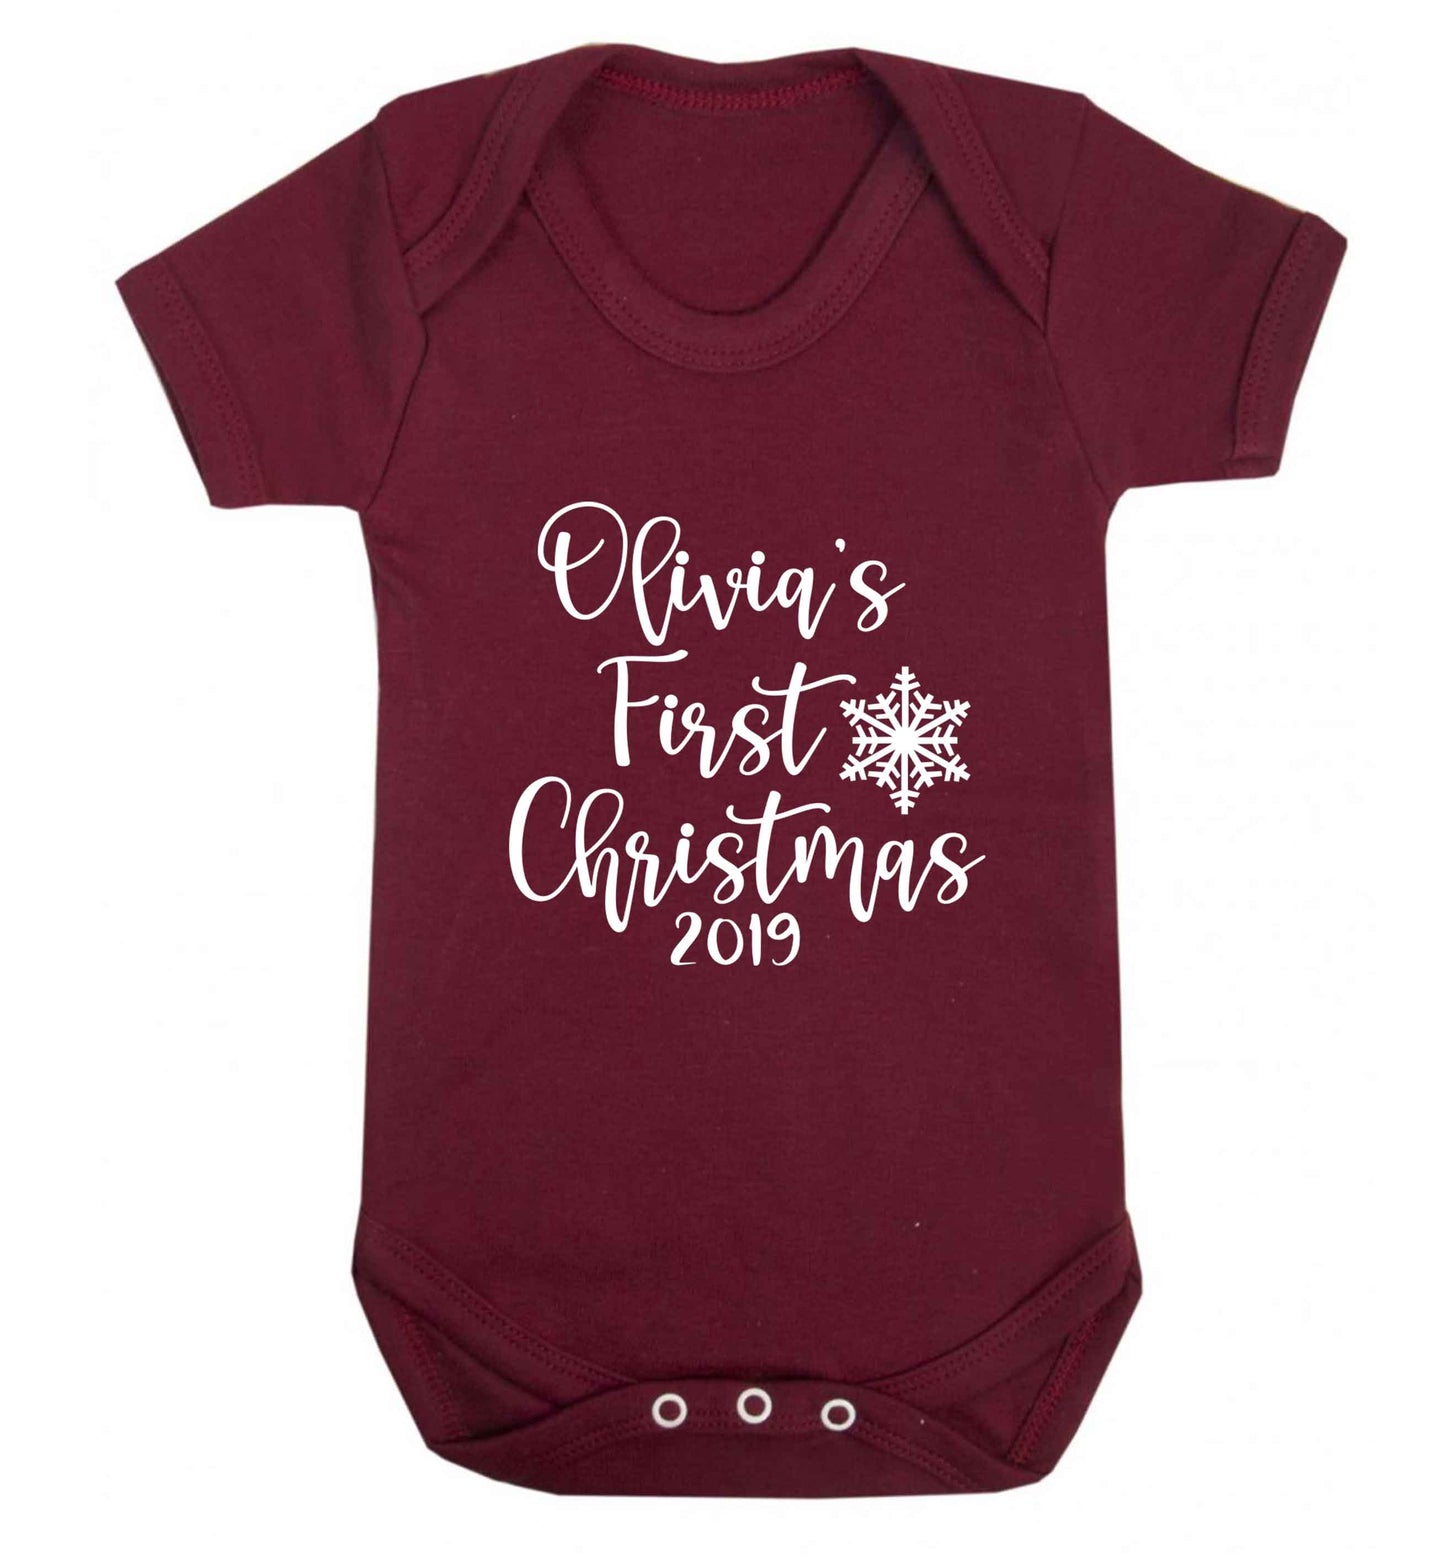 Personalised first Christmas - script text baby vest maroon 18-24 months